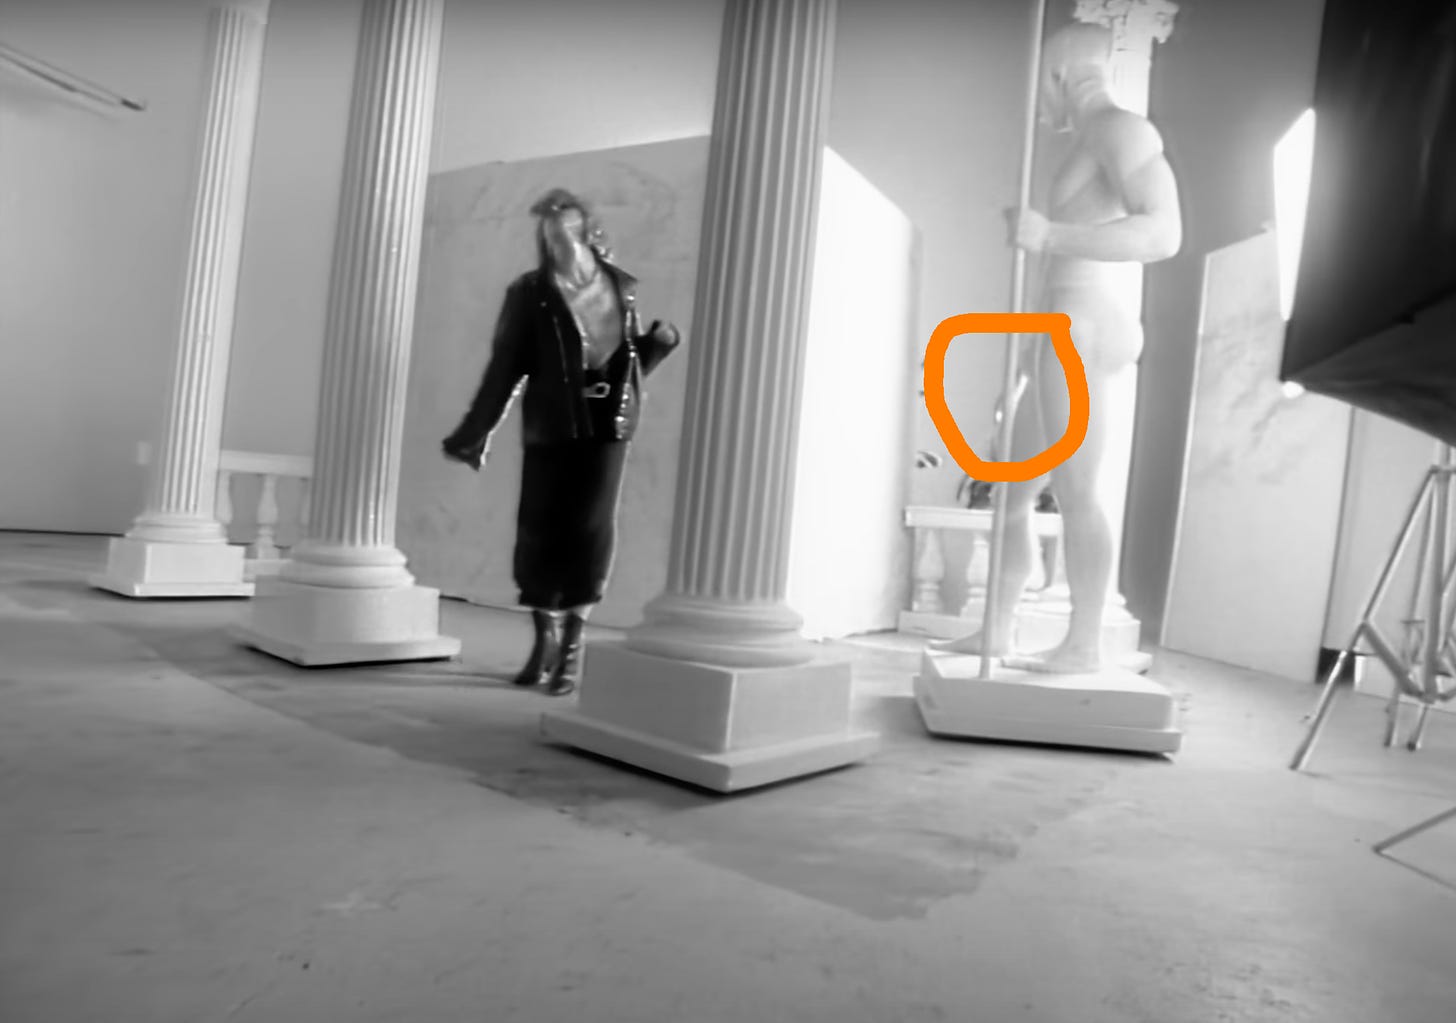 Still from the Borderline video featuring Madonna dancing around a photographic studio with Greek columns and a statue with what looks like a large appendage on the front of its body which is circled in orange so that readers can see it properly